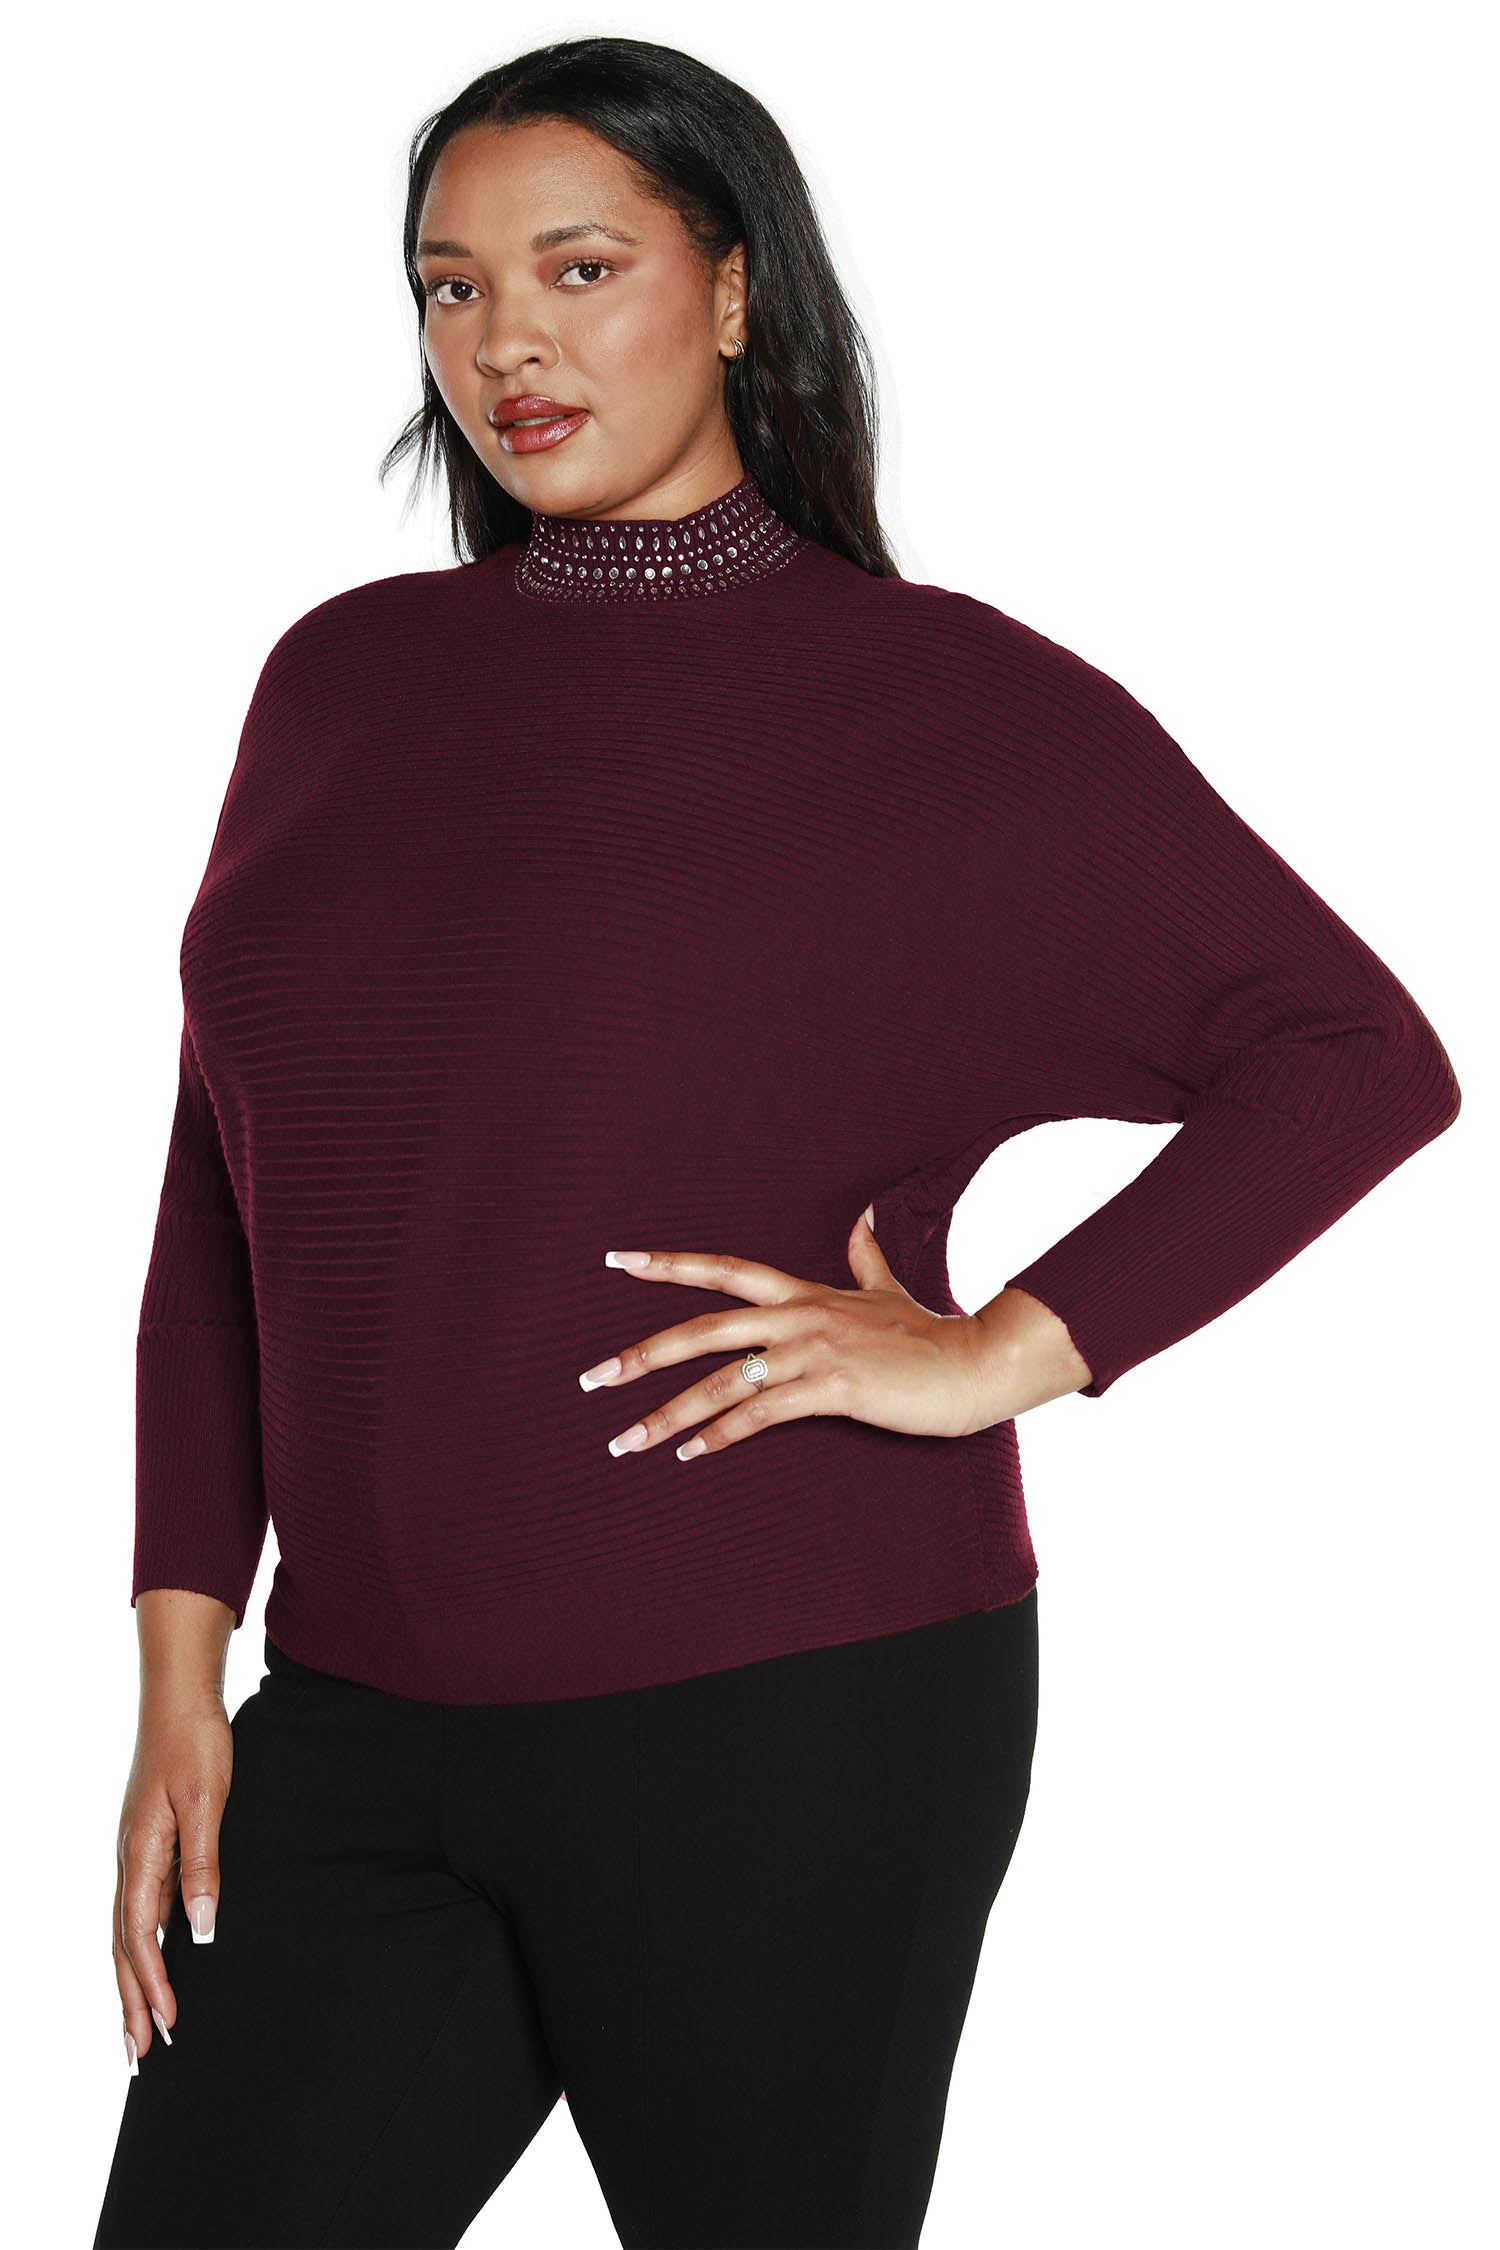 Women's Ribbed Knit Dolman with Mock Neck and Rhinestone Detailing | Curvy